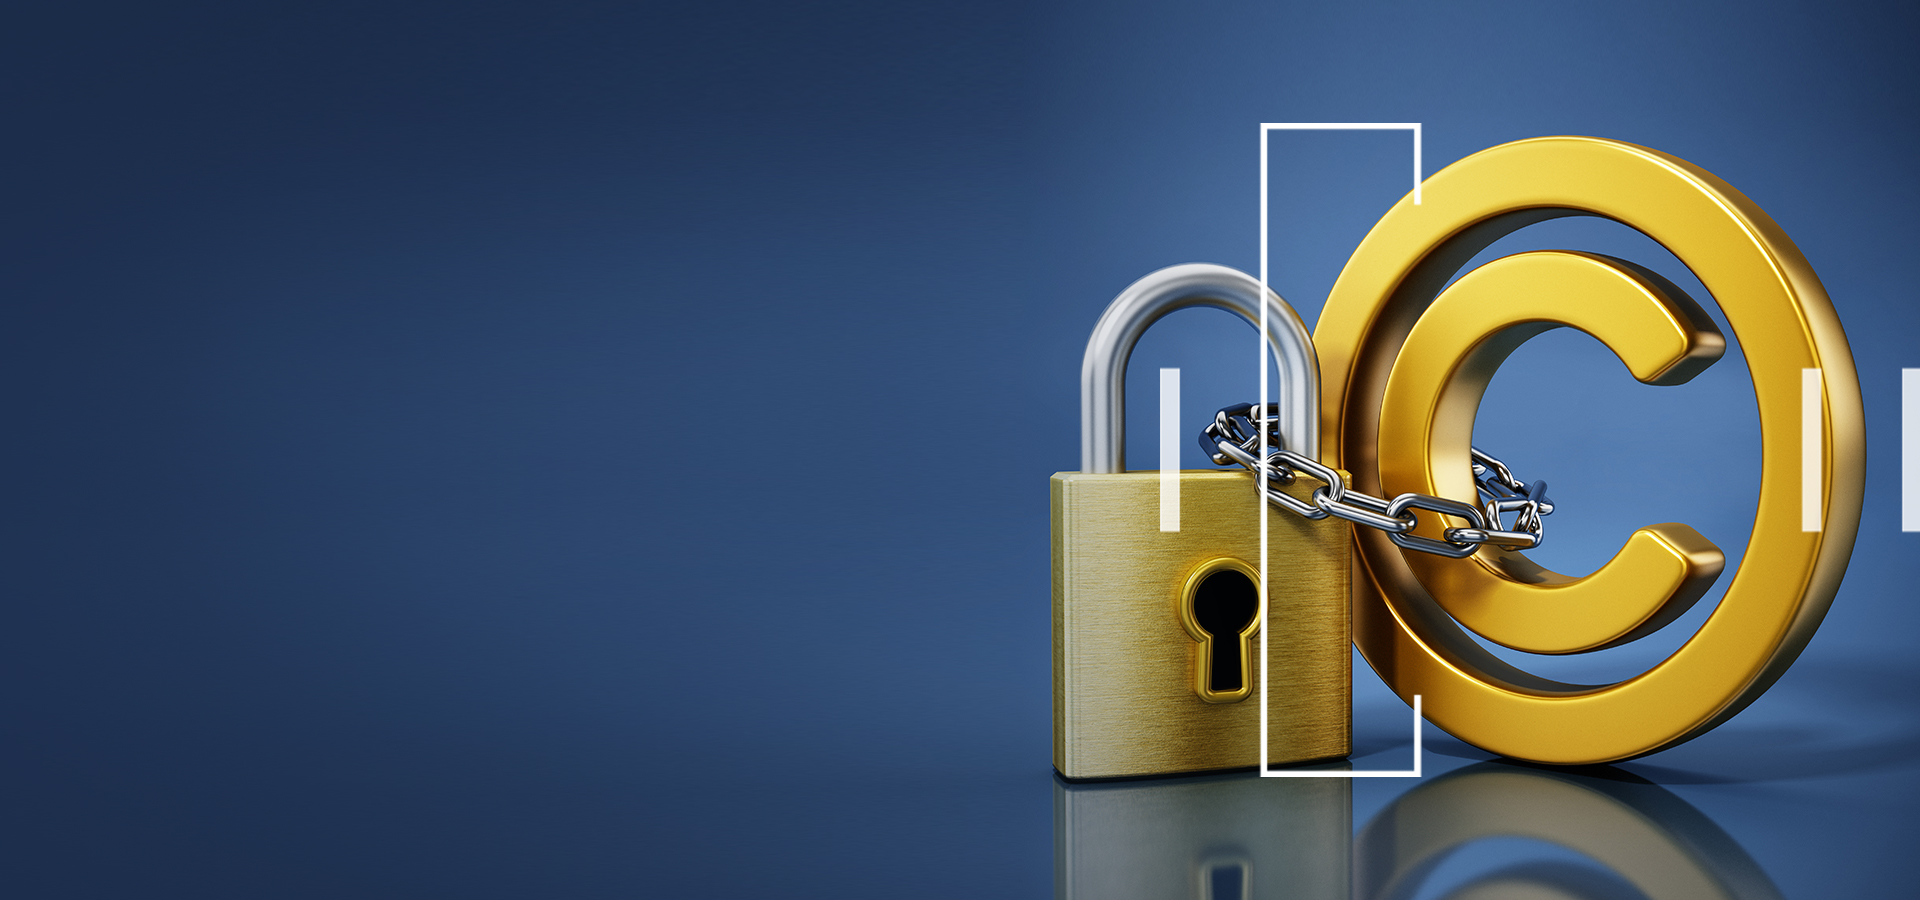 A Firewall Approach to Safeguard Intellectual Property